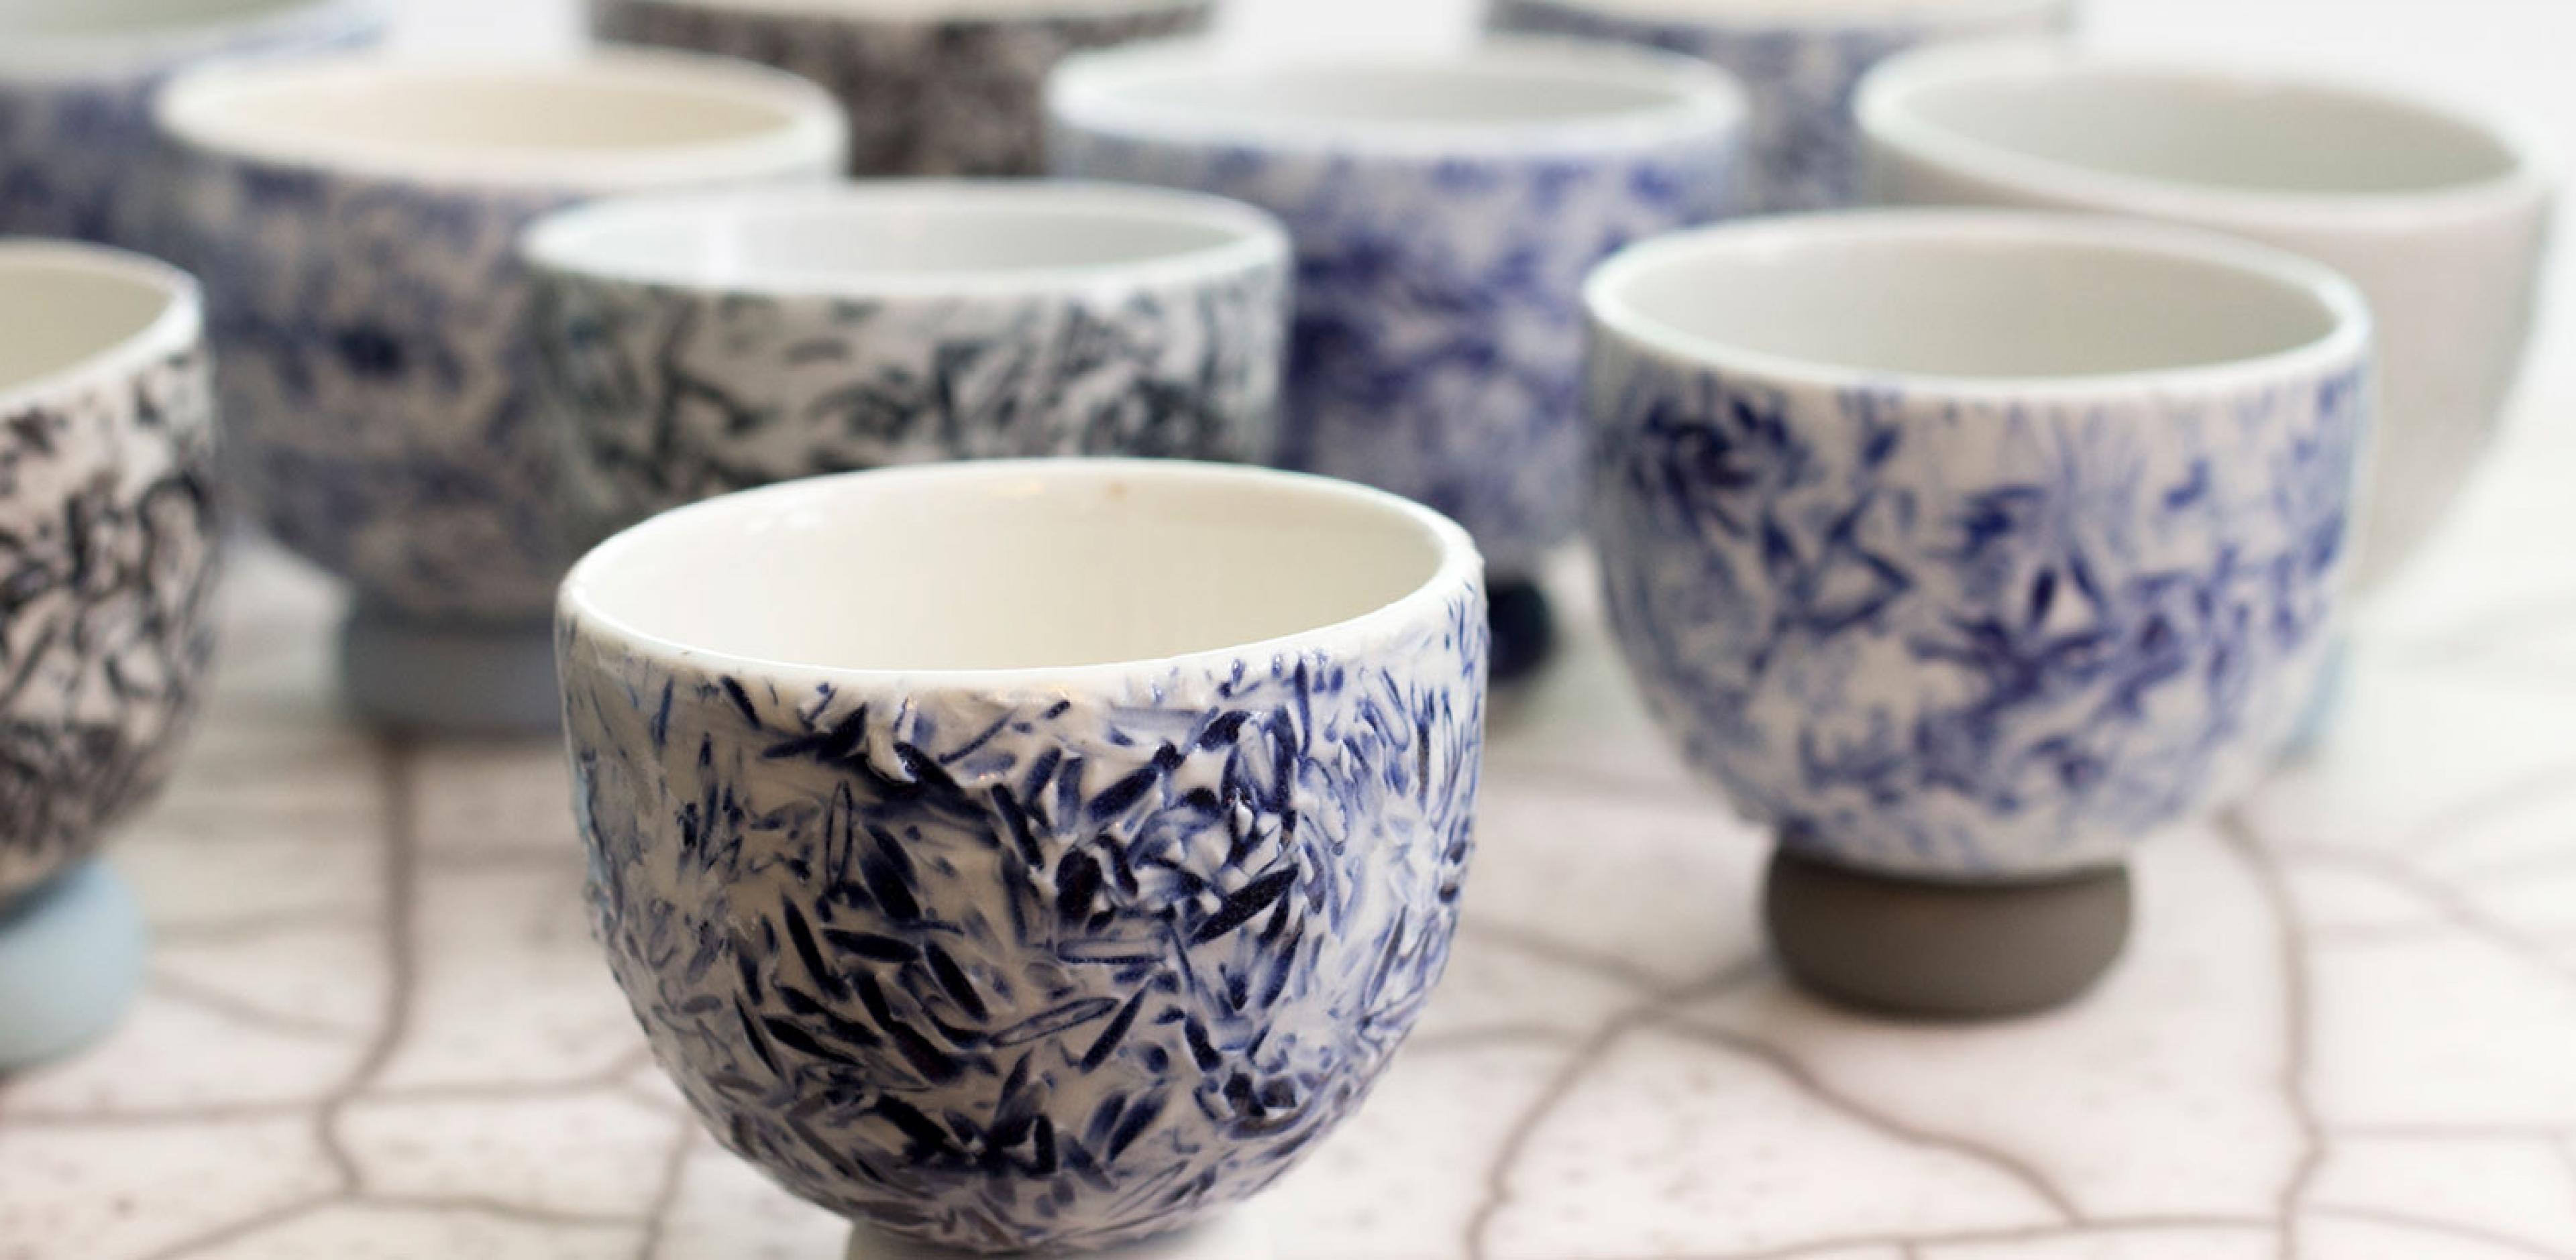 ceramic bowls with blue patterns